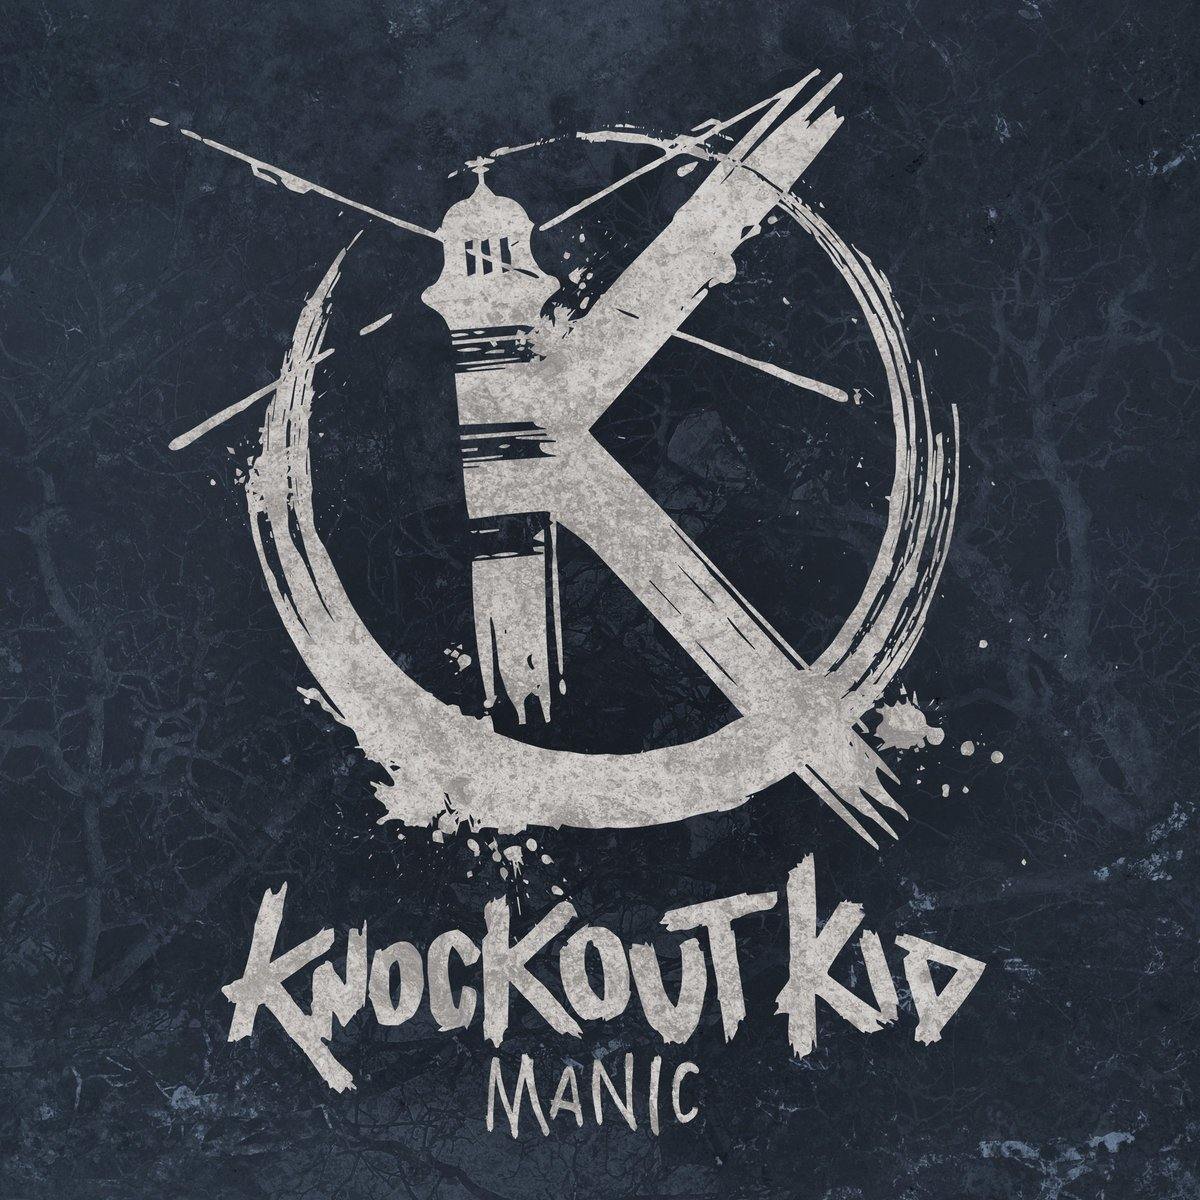 Buy – Knockout Kid "Manic" – Band & Music Merch – Cold Cuts Merch